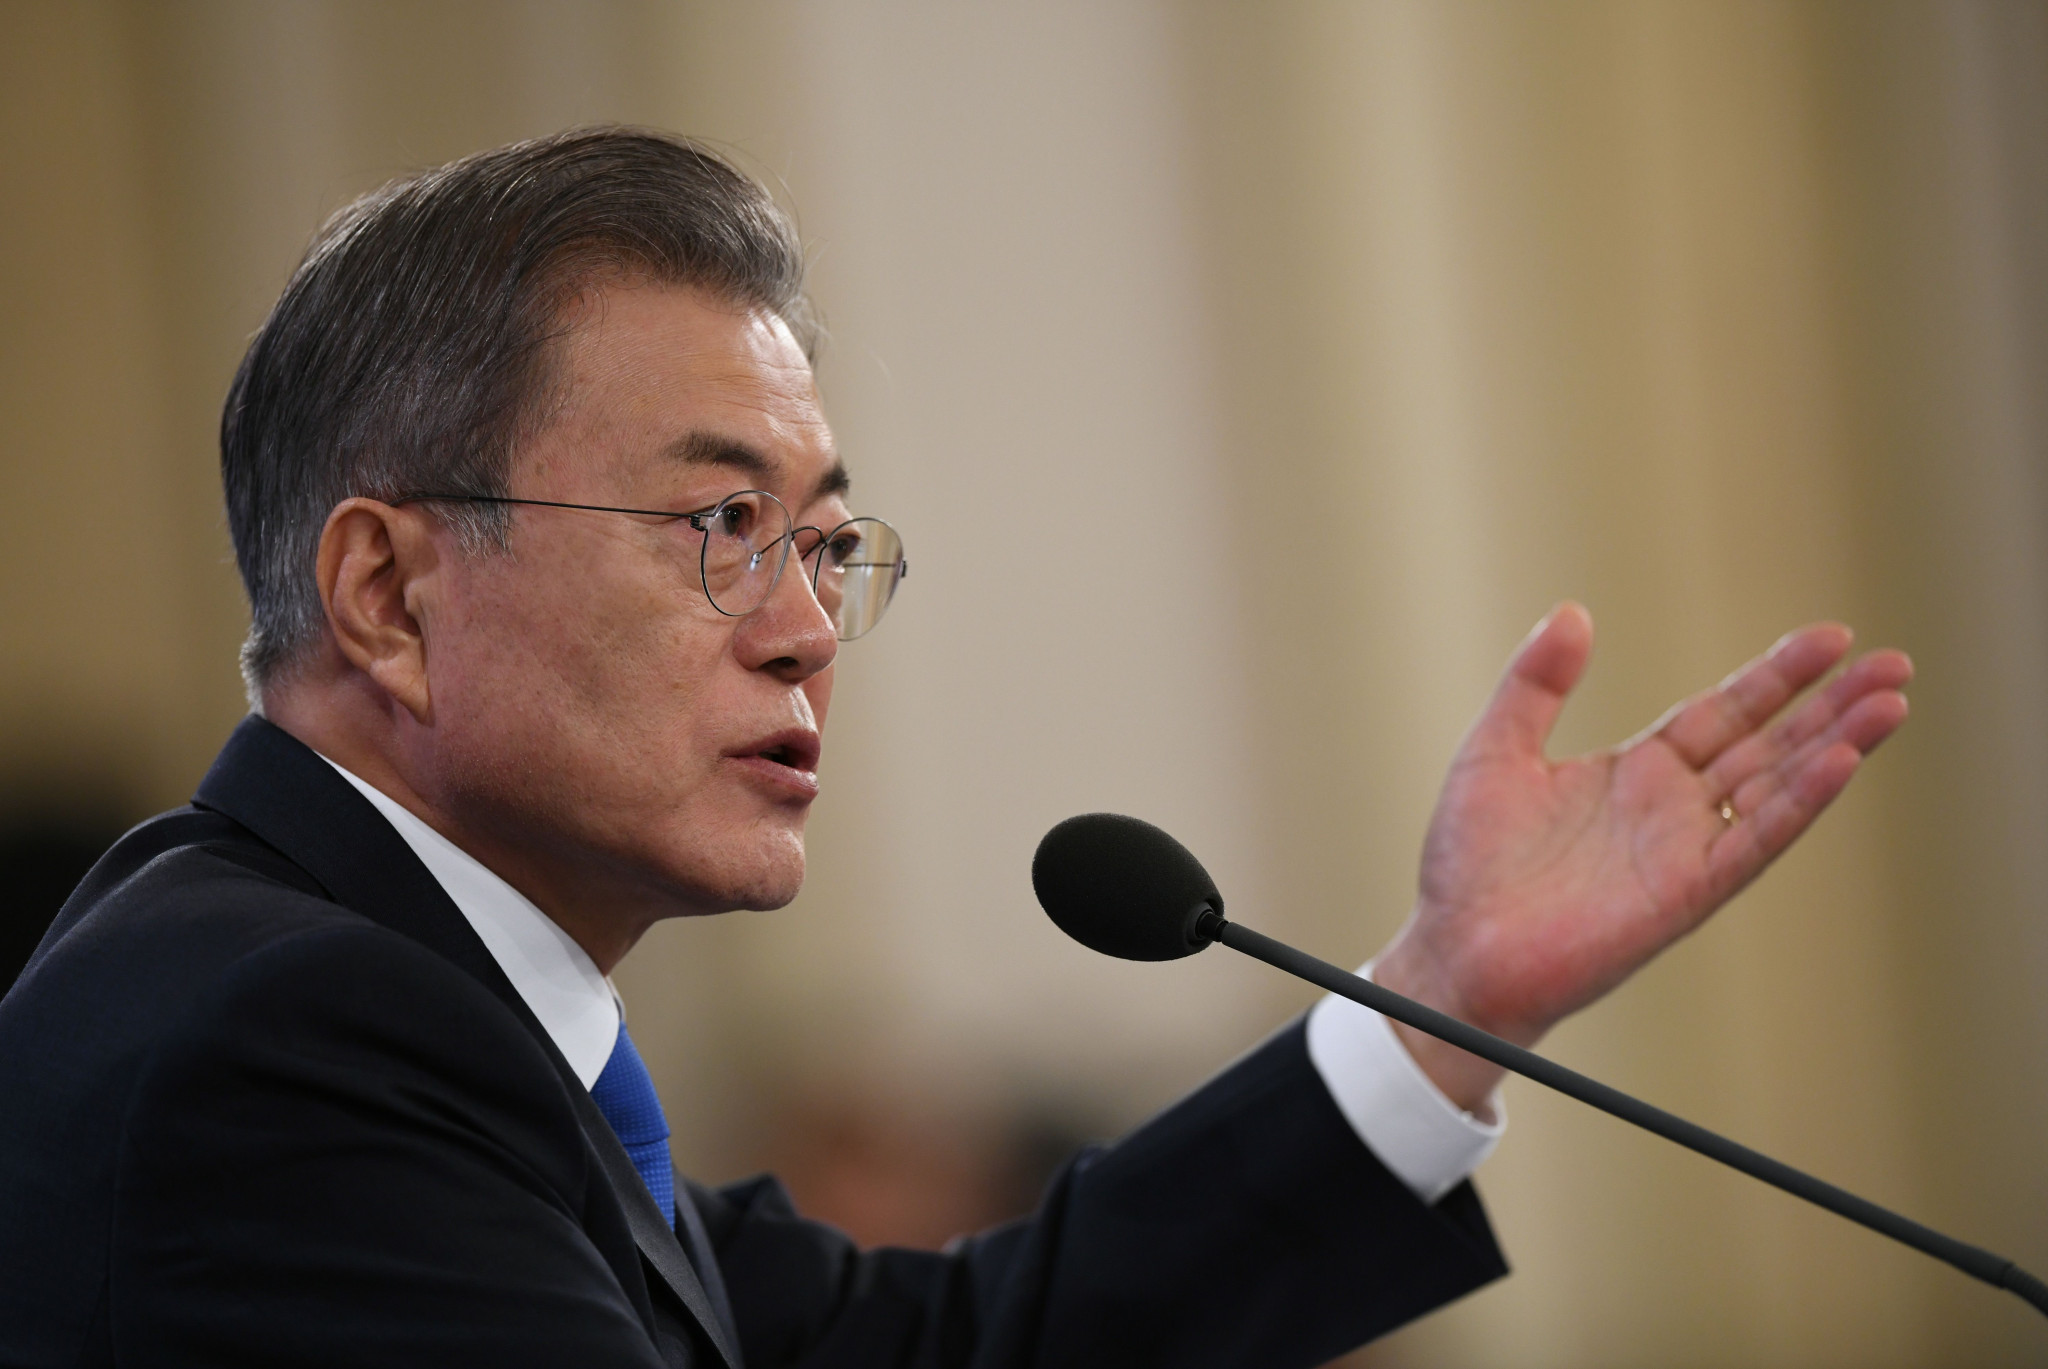 South Korean President Moon Jae-in has claimed violence and pressuring athletes cannot be justified ©Getty Images